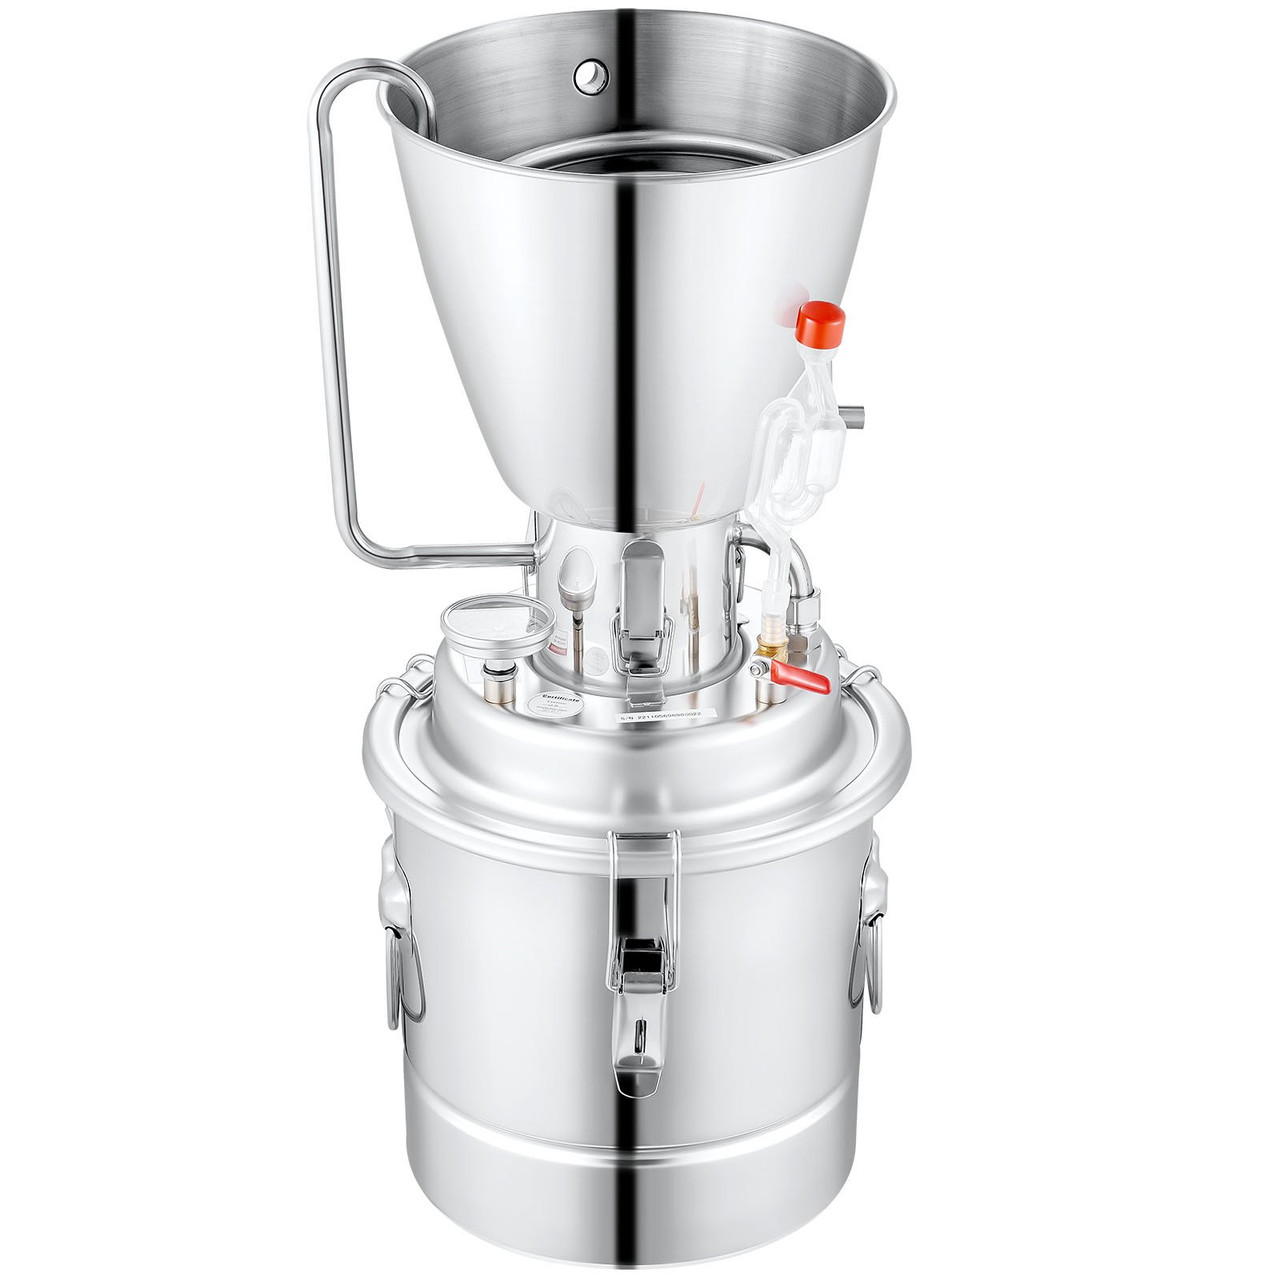 VEVOR Water Alcohol Distiller, 8 Gal/30 L, 304 Stainless Steel Still w/ 6-Lap Coil & Exhaust Port, Home Distillery Kit w/Thermometer Pump, Oxygen-Free Steaming for Purer Whiskey Brandy Essential Oil